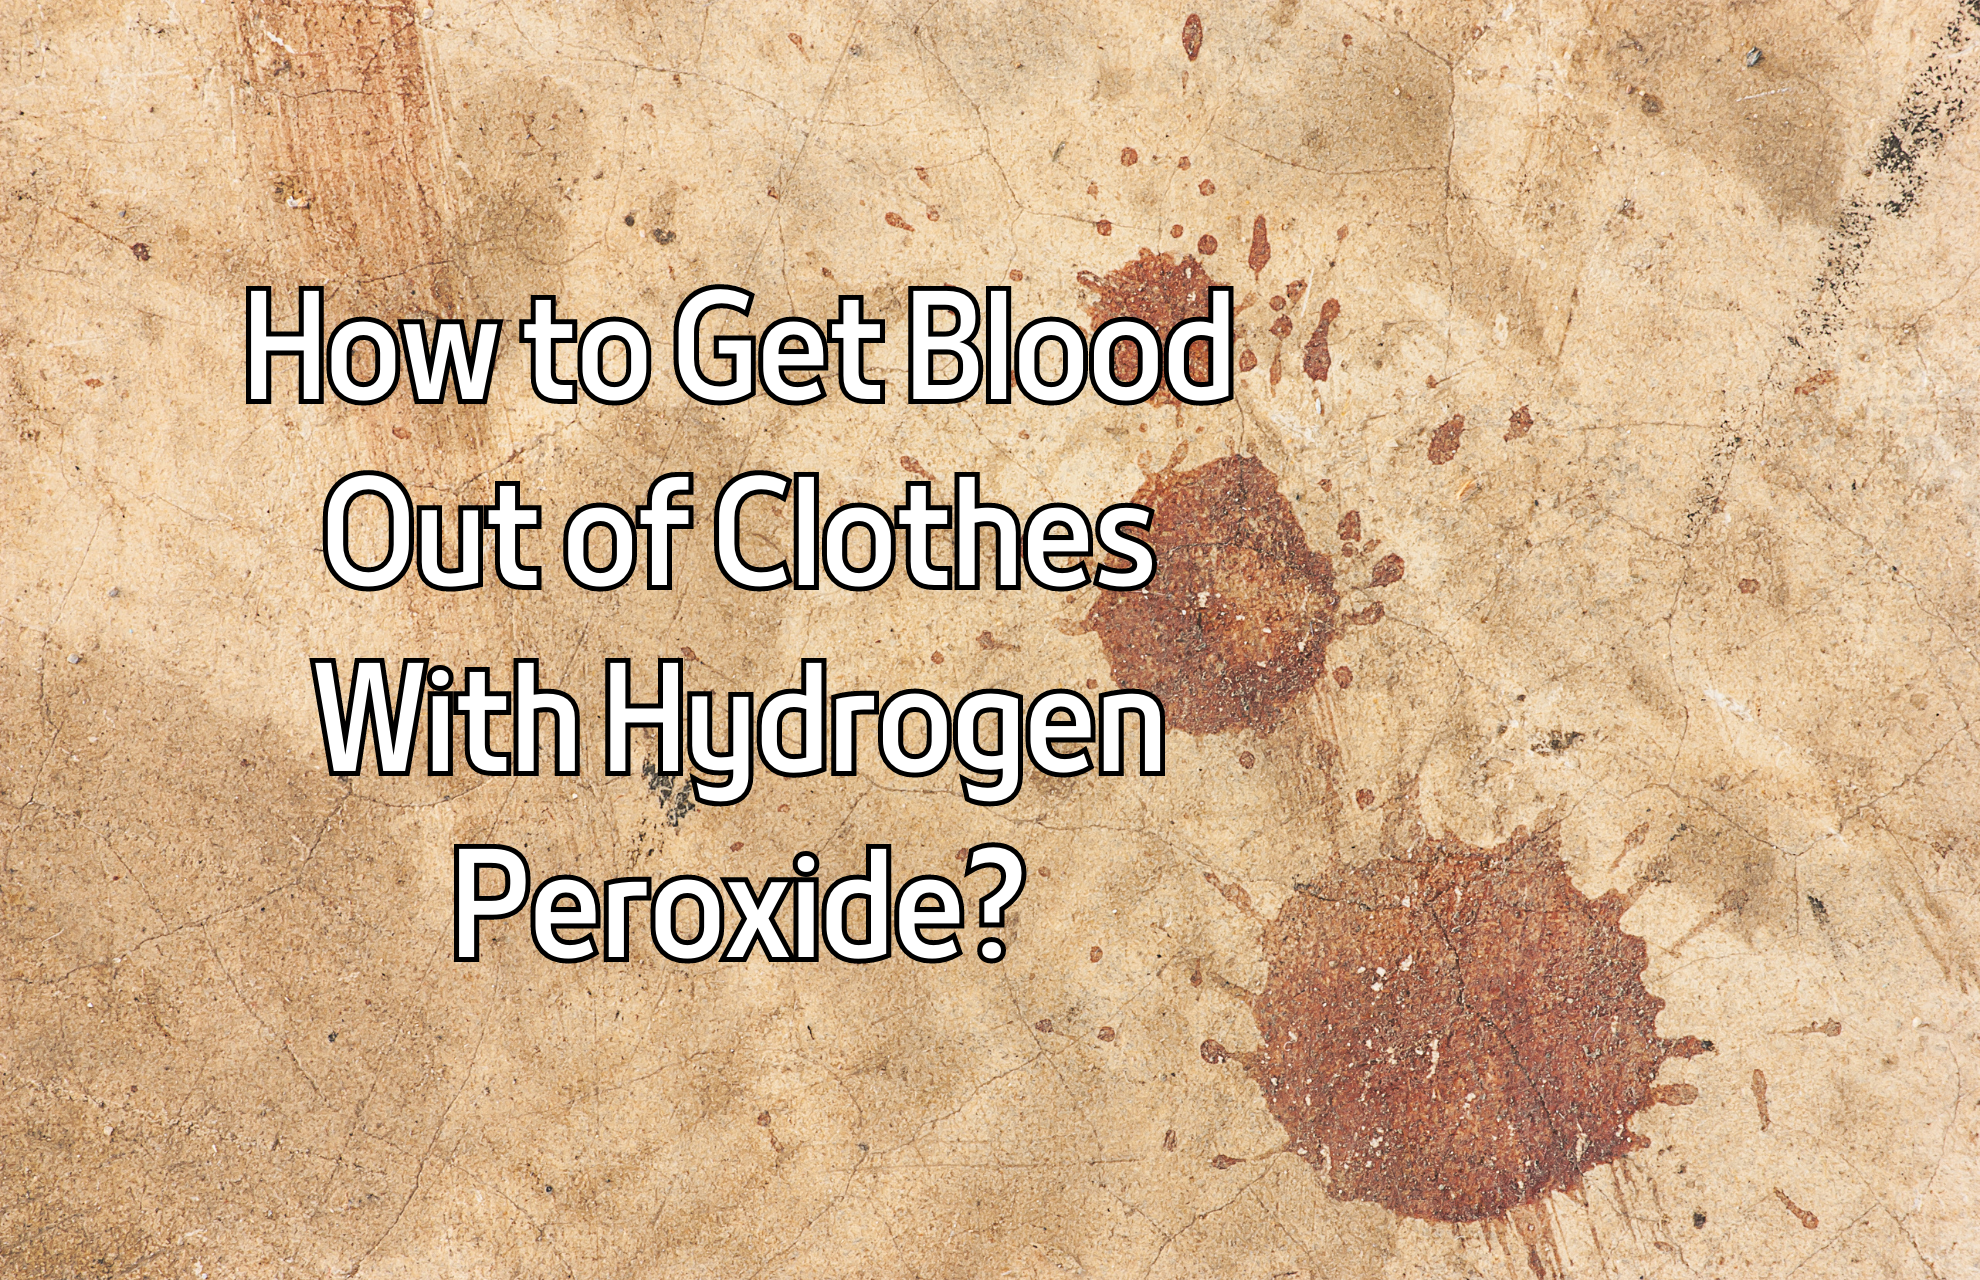 How to Get Blood Out of Clothes With Hydrogen Peroxide? Step-By-Step